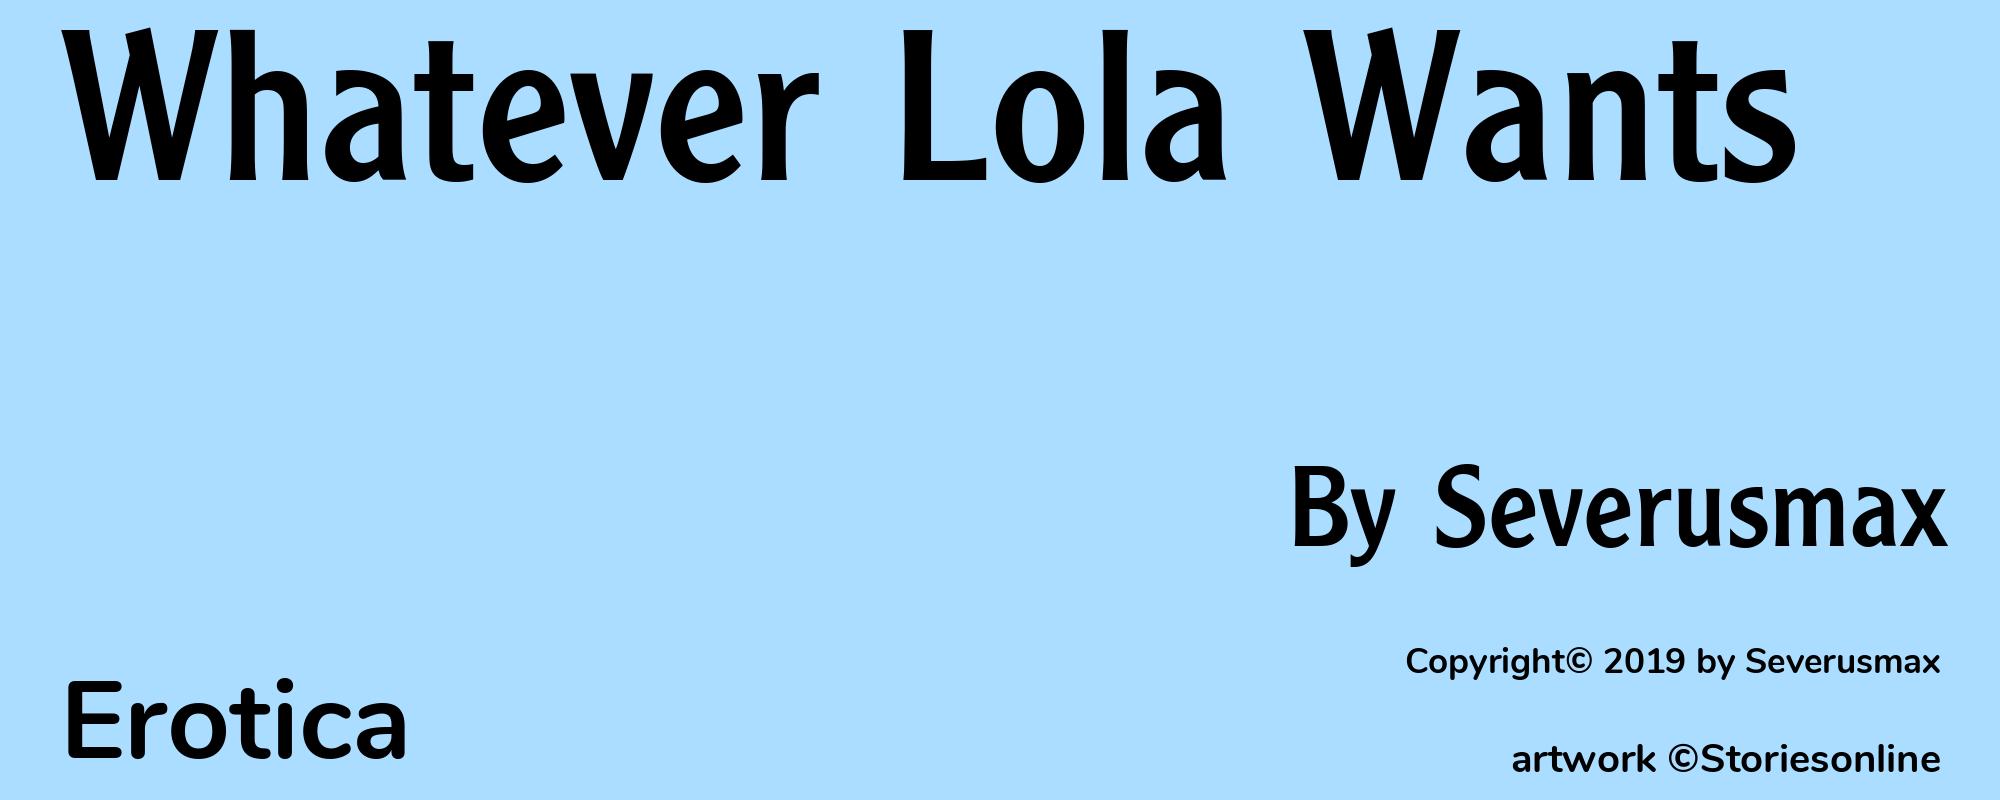 Whatever Lola Wants - Cover